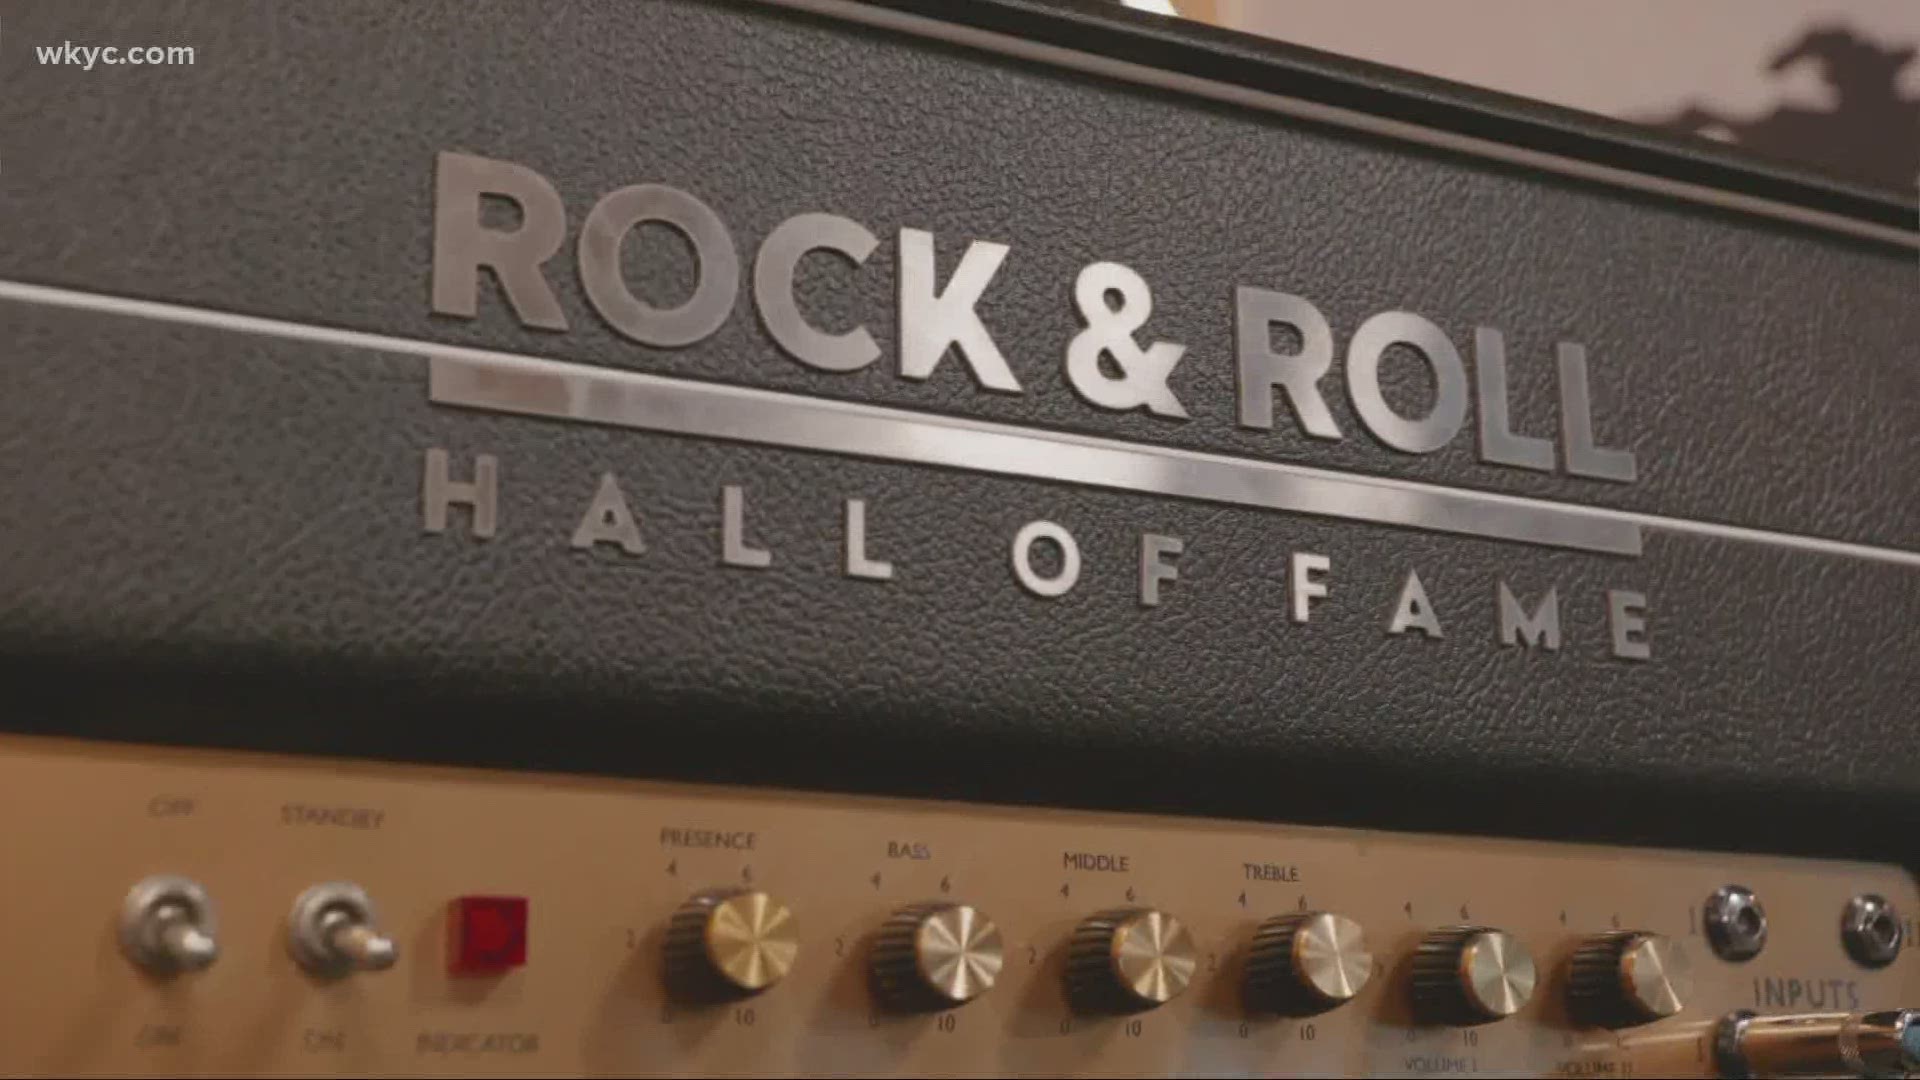 A lot of new things are headed to the Rock & Roll Hall of Fame this summer. Now open seven days a week with extended hours Thursday, Friday and Saturday night.